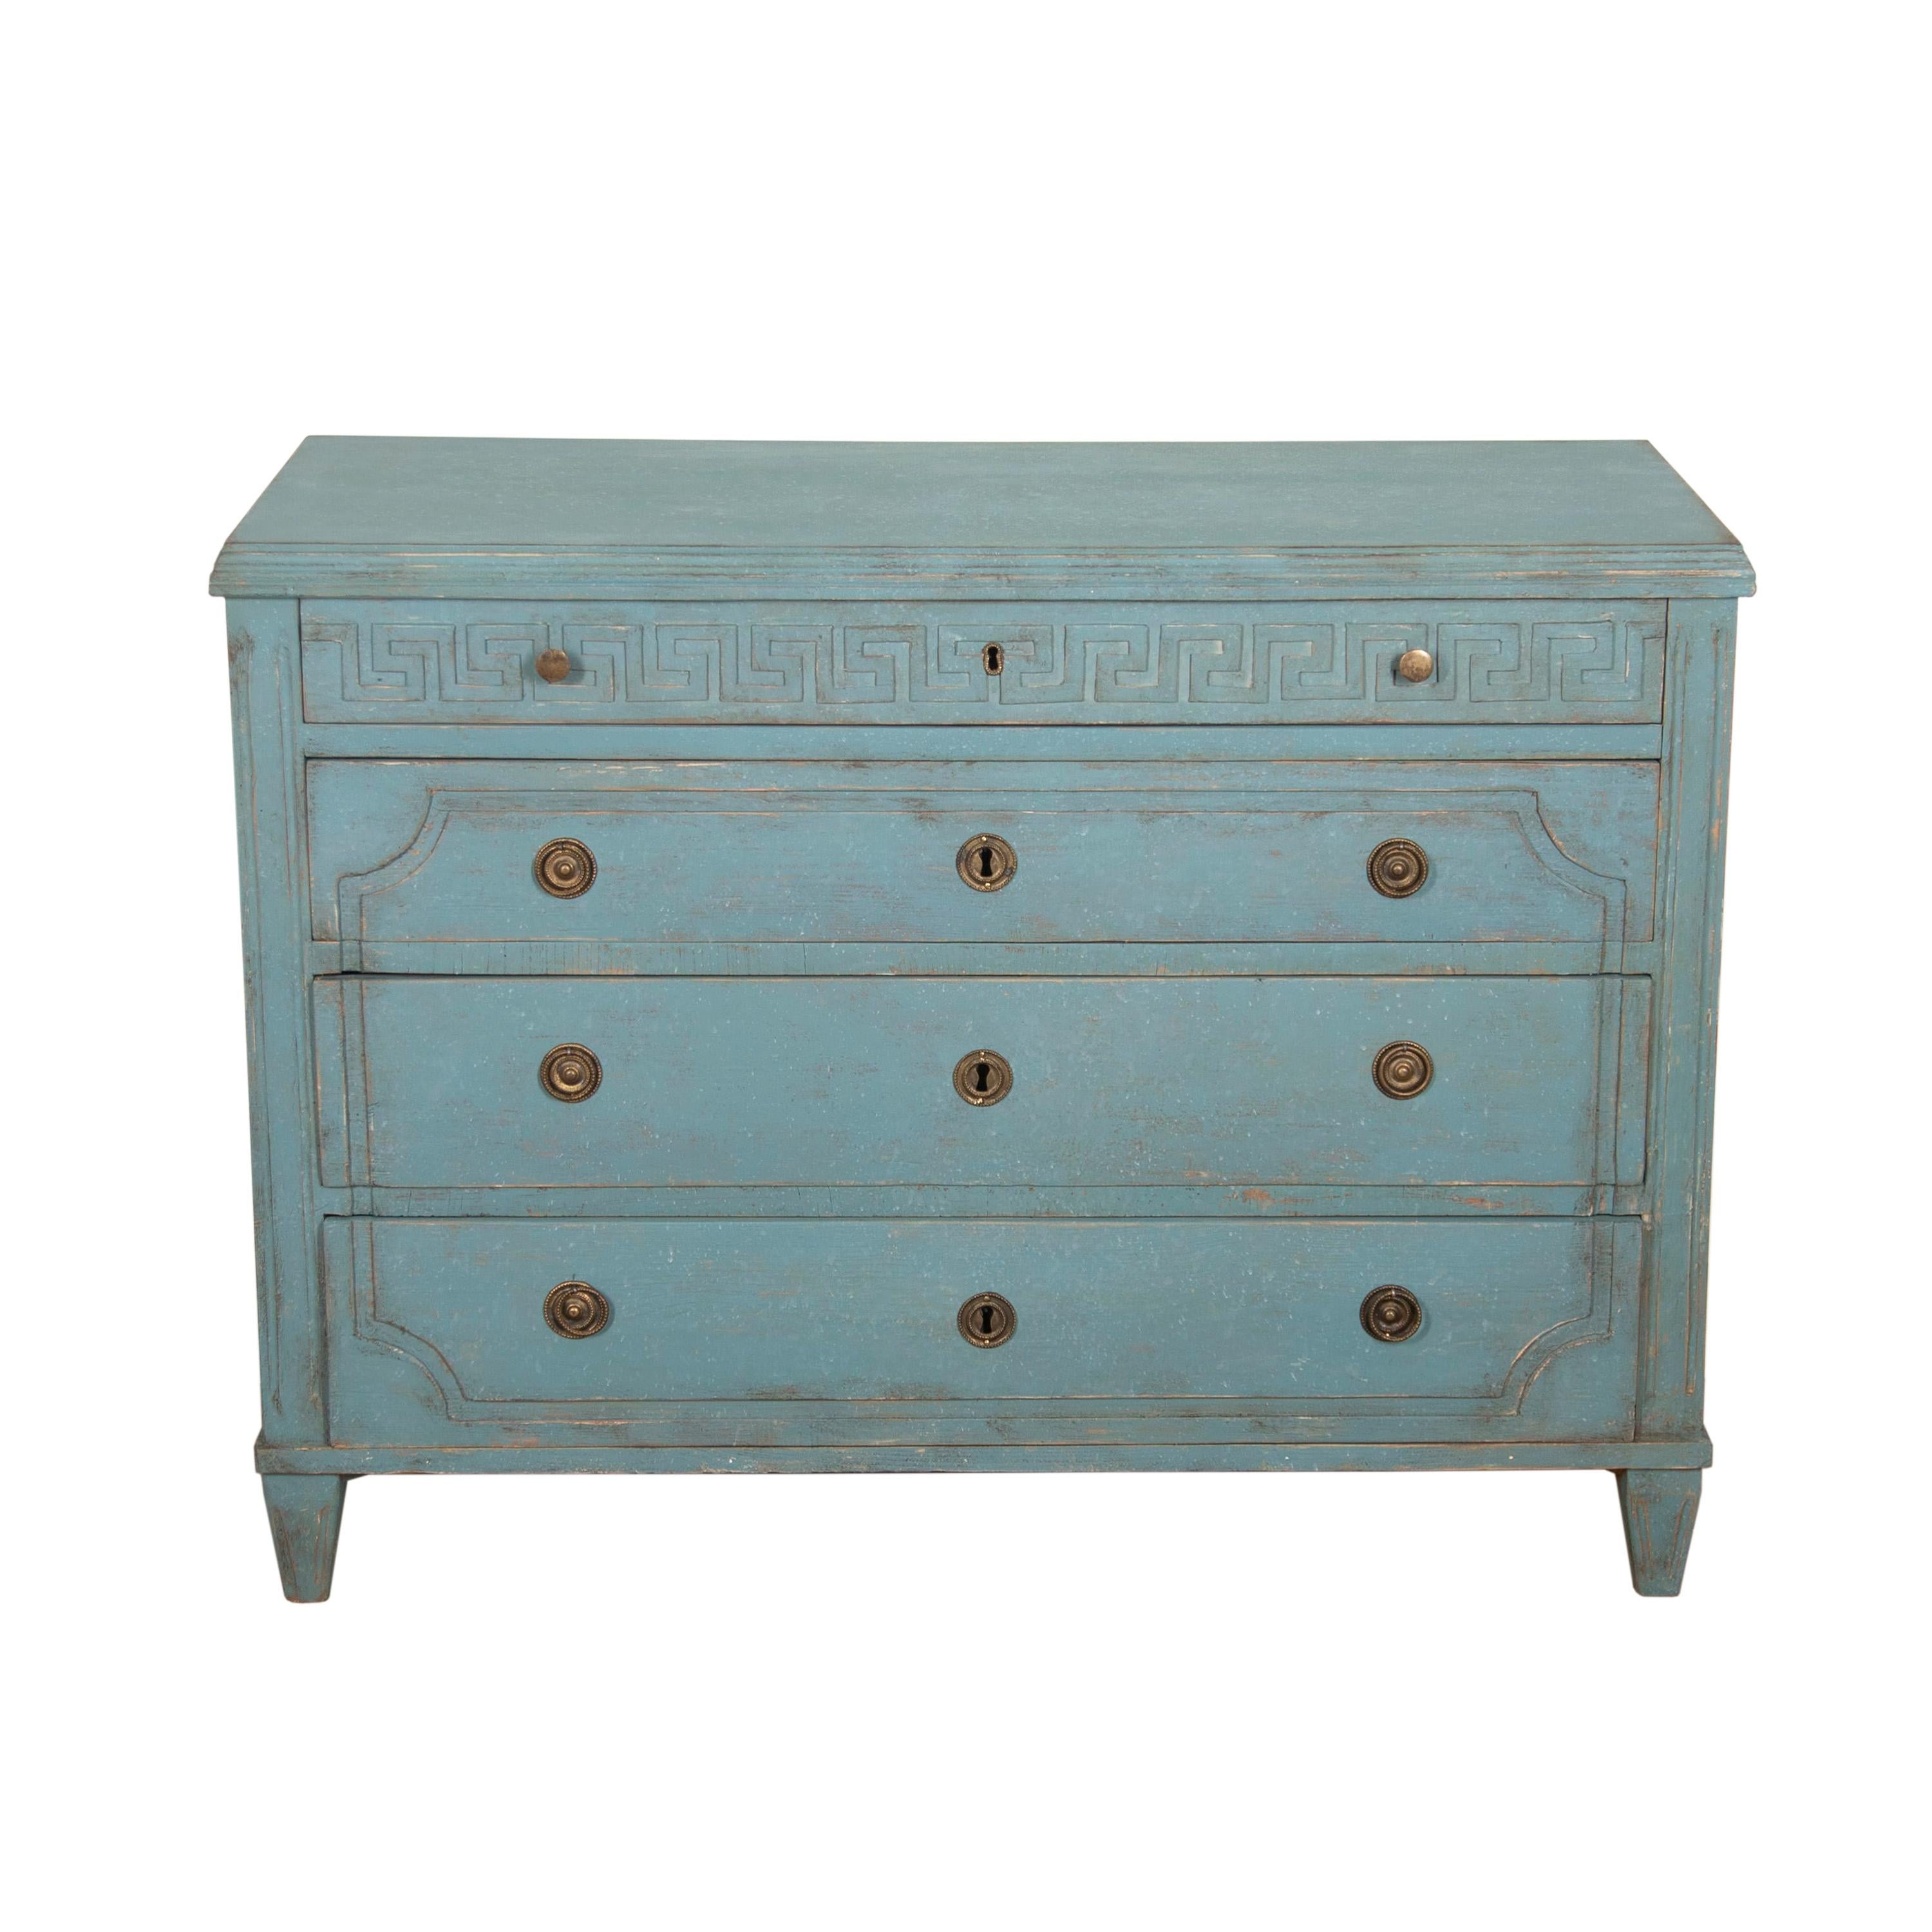 Early 19th century Swedish commode.
This commode retains period details which include a decorative Greek key design to the frieze and original hardware. 
Featuring a wonderfully painted light blue surface and colour throughout, this commode